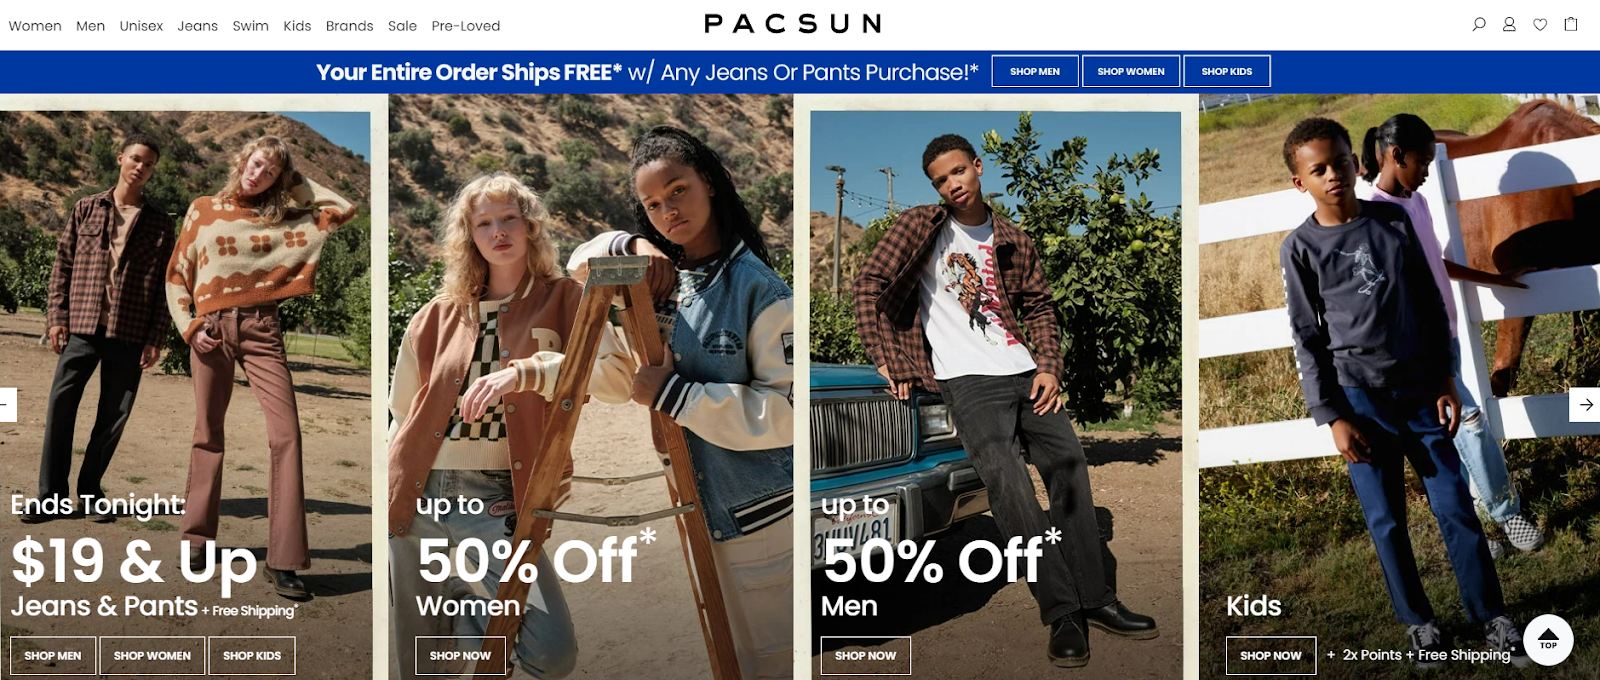 PacSun is the go-to for the latest jeans